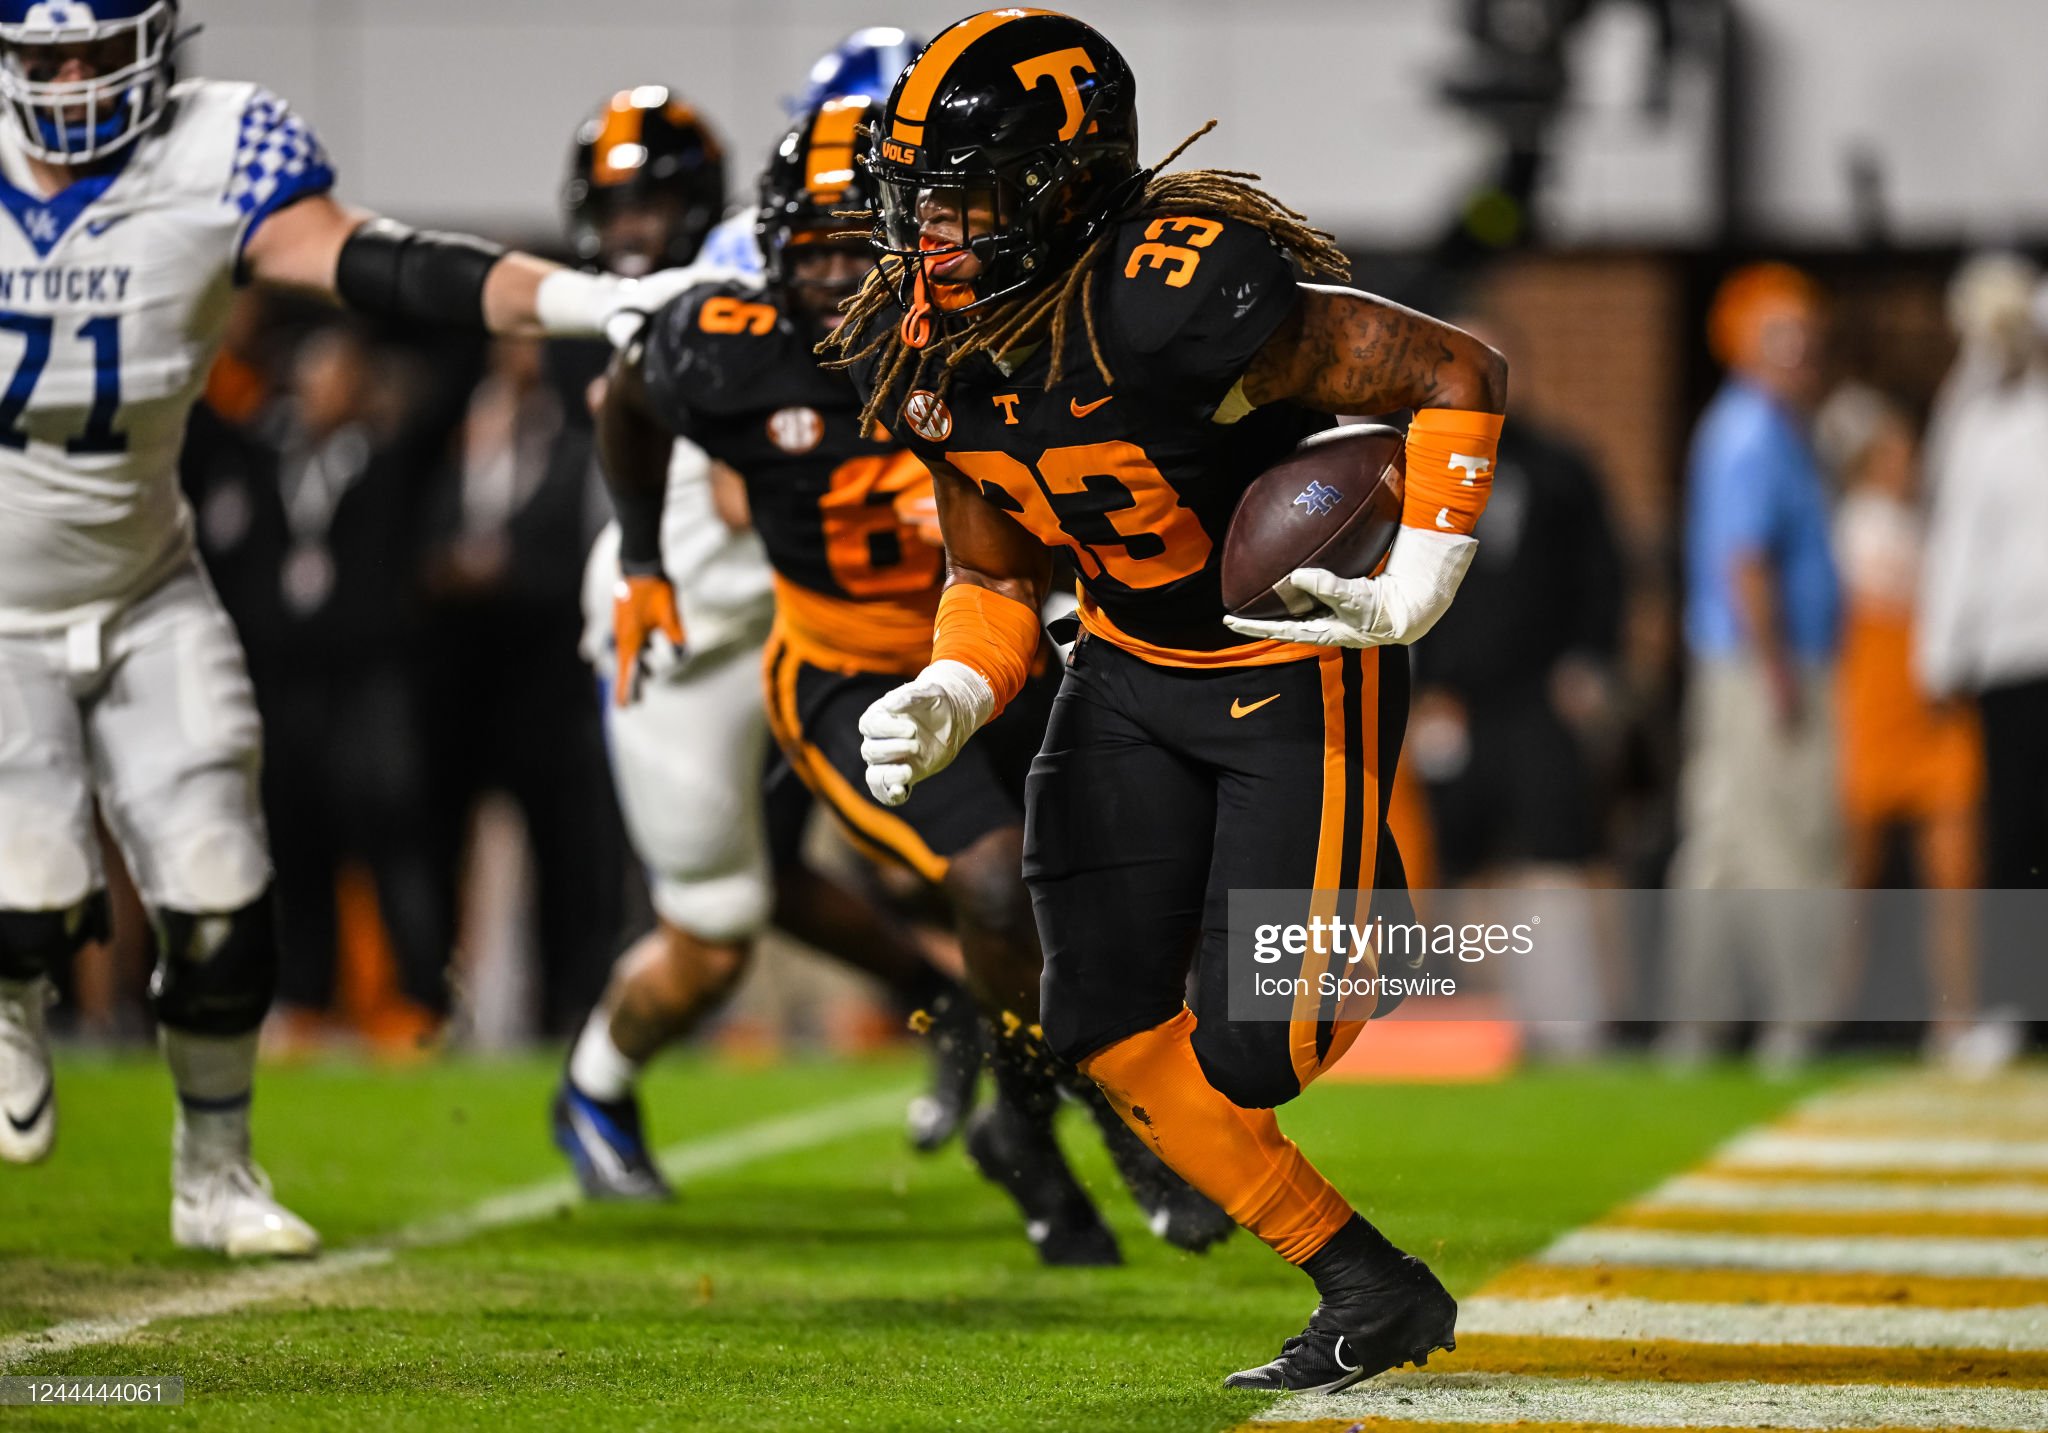 2023 NFL Draft Scouting Report: LB Jeremy Banks, Tennessee